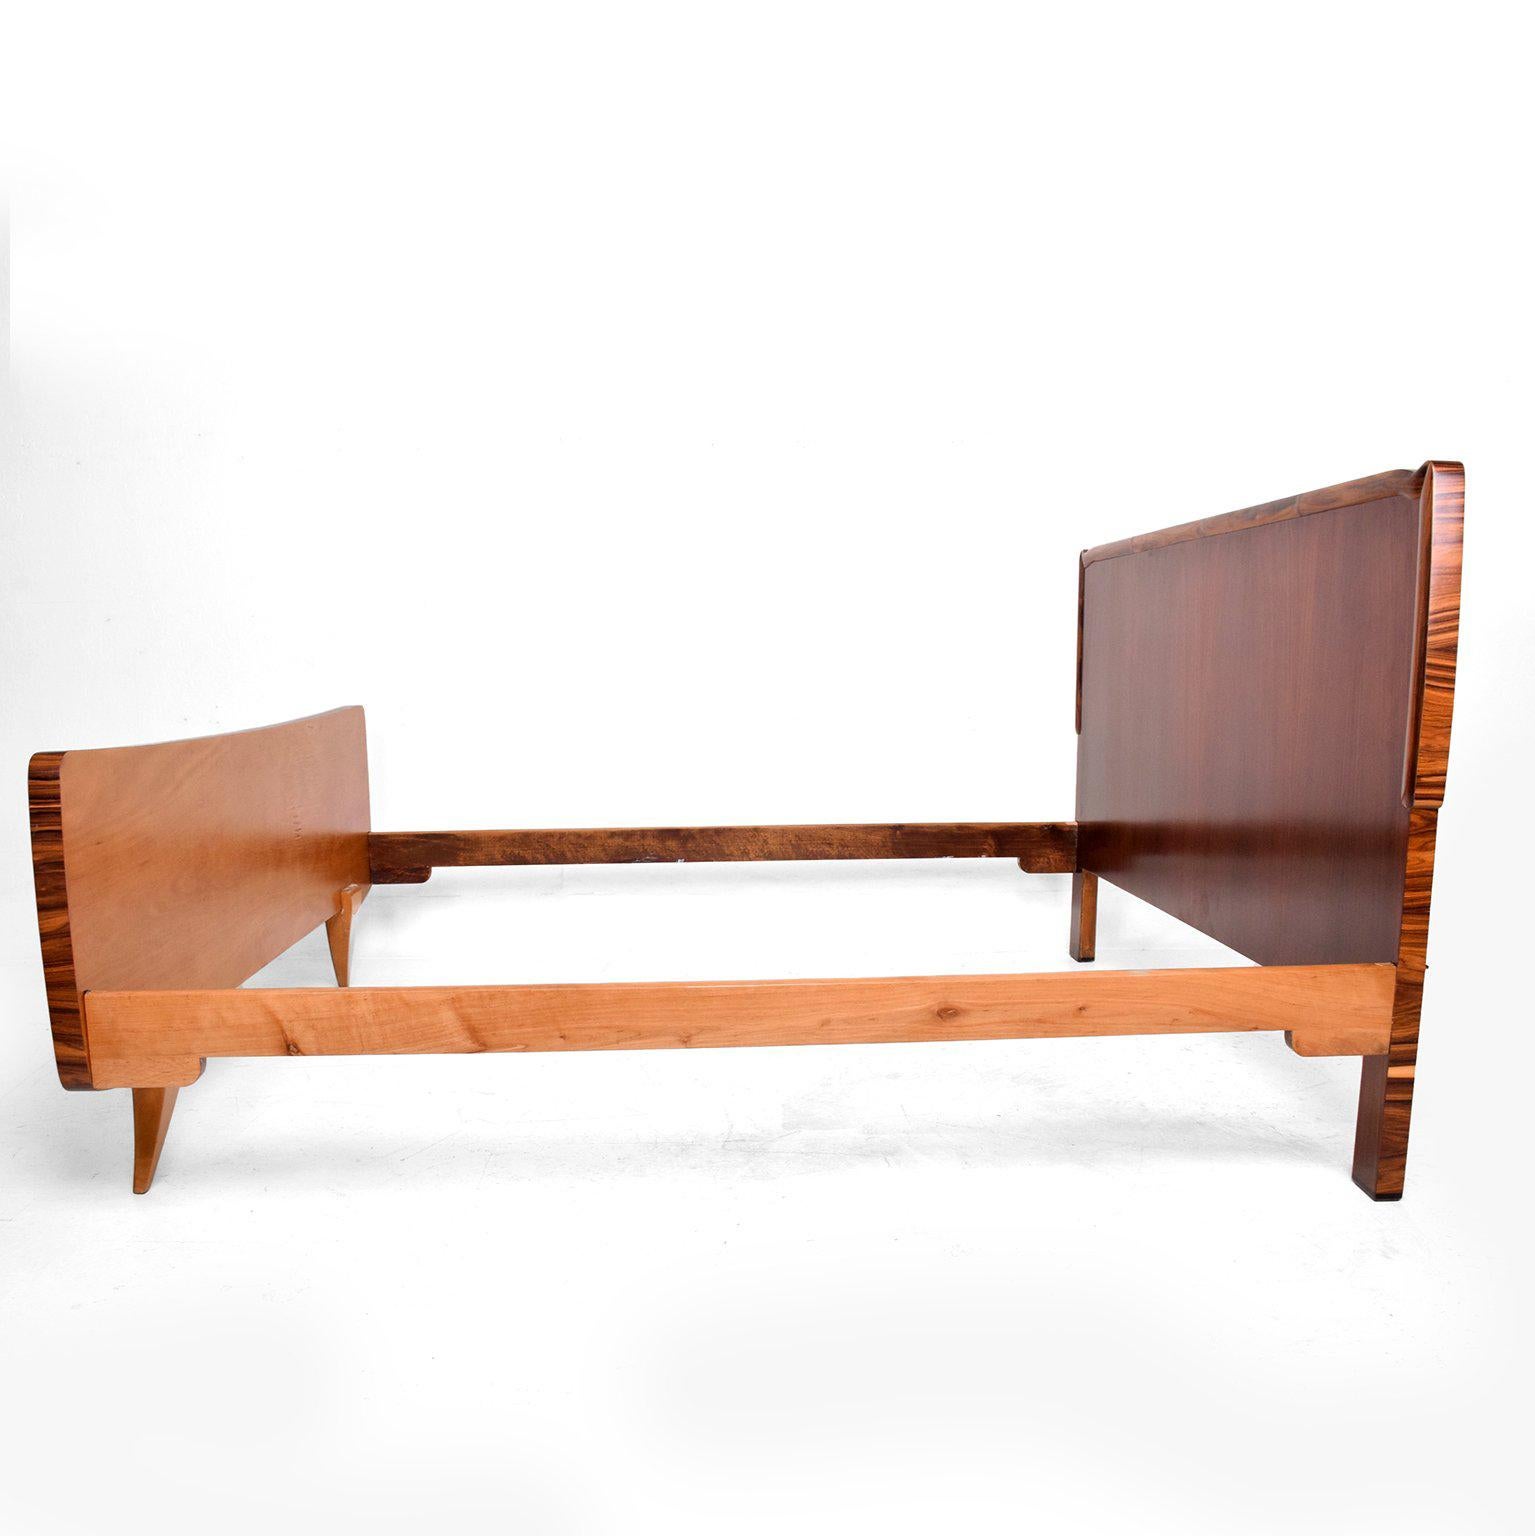 Elegant European Exotic Wood Mid-Century Modern Italian Bed Frame ITALY 1950s
No maker label visible. Designed in the style of Osvaldo Borsani. 
Features Exotic Wood selection of Burlwood, Macassar, Ebony, Rosewood and Maple.
European beds have